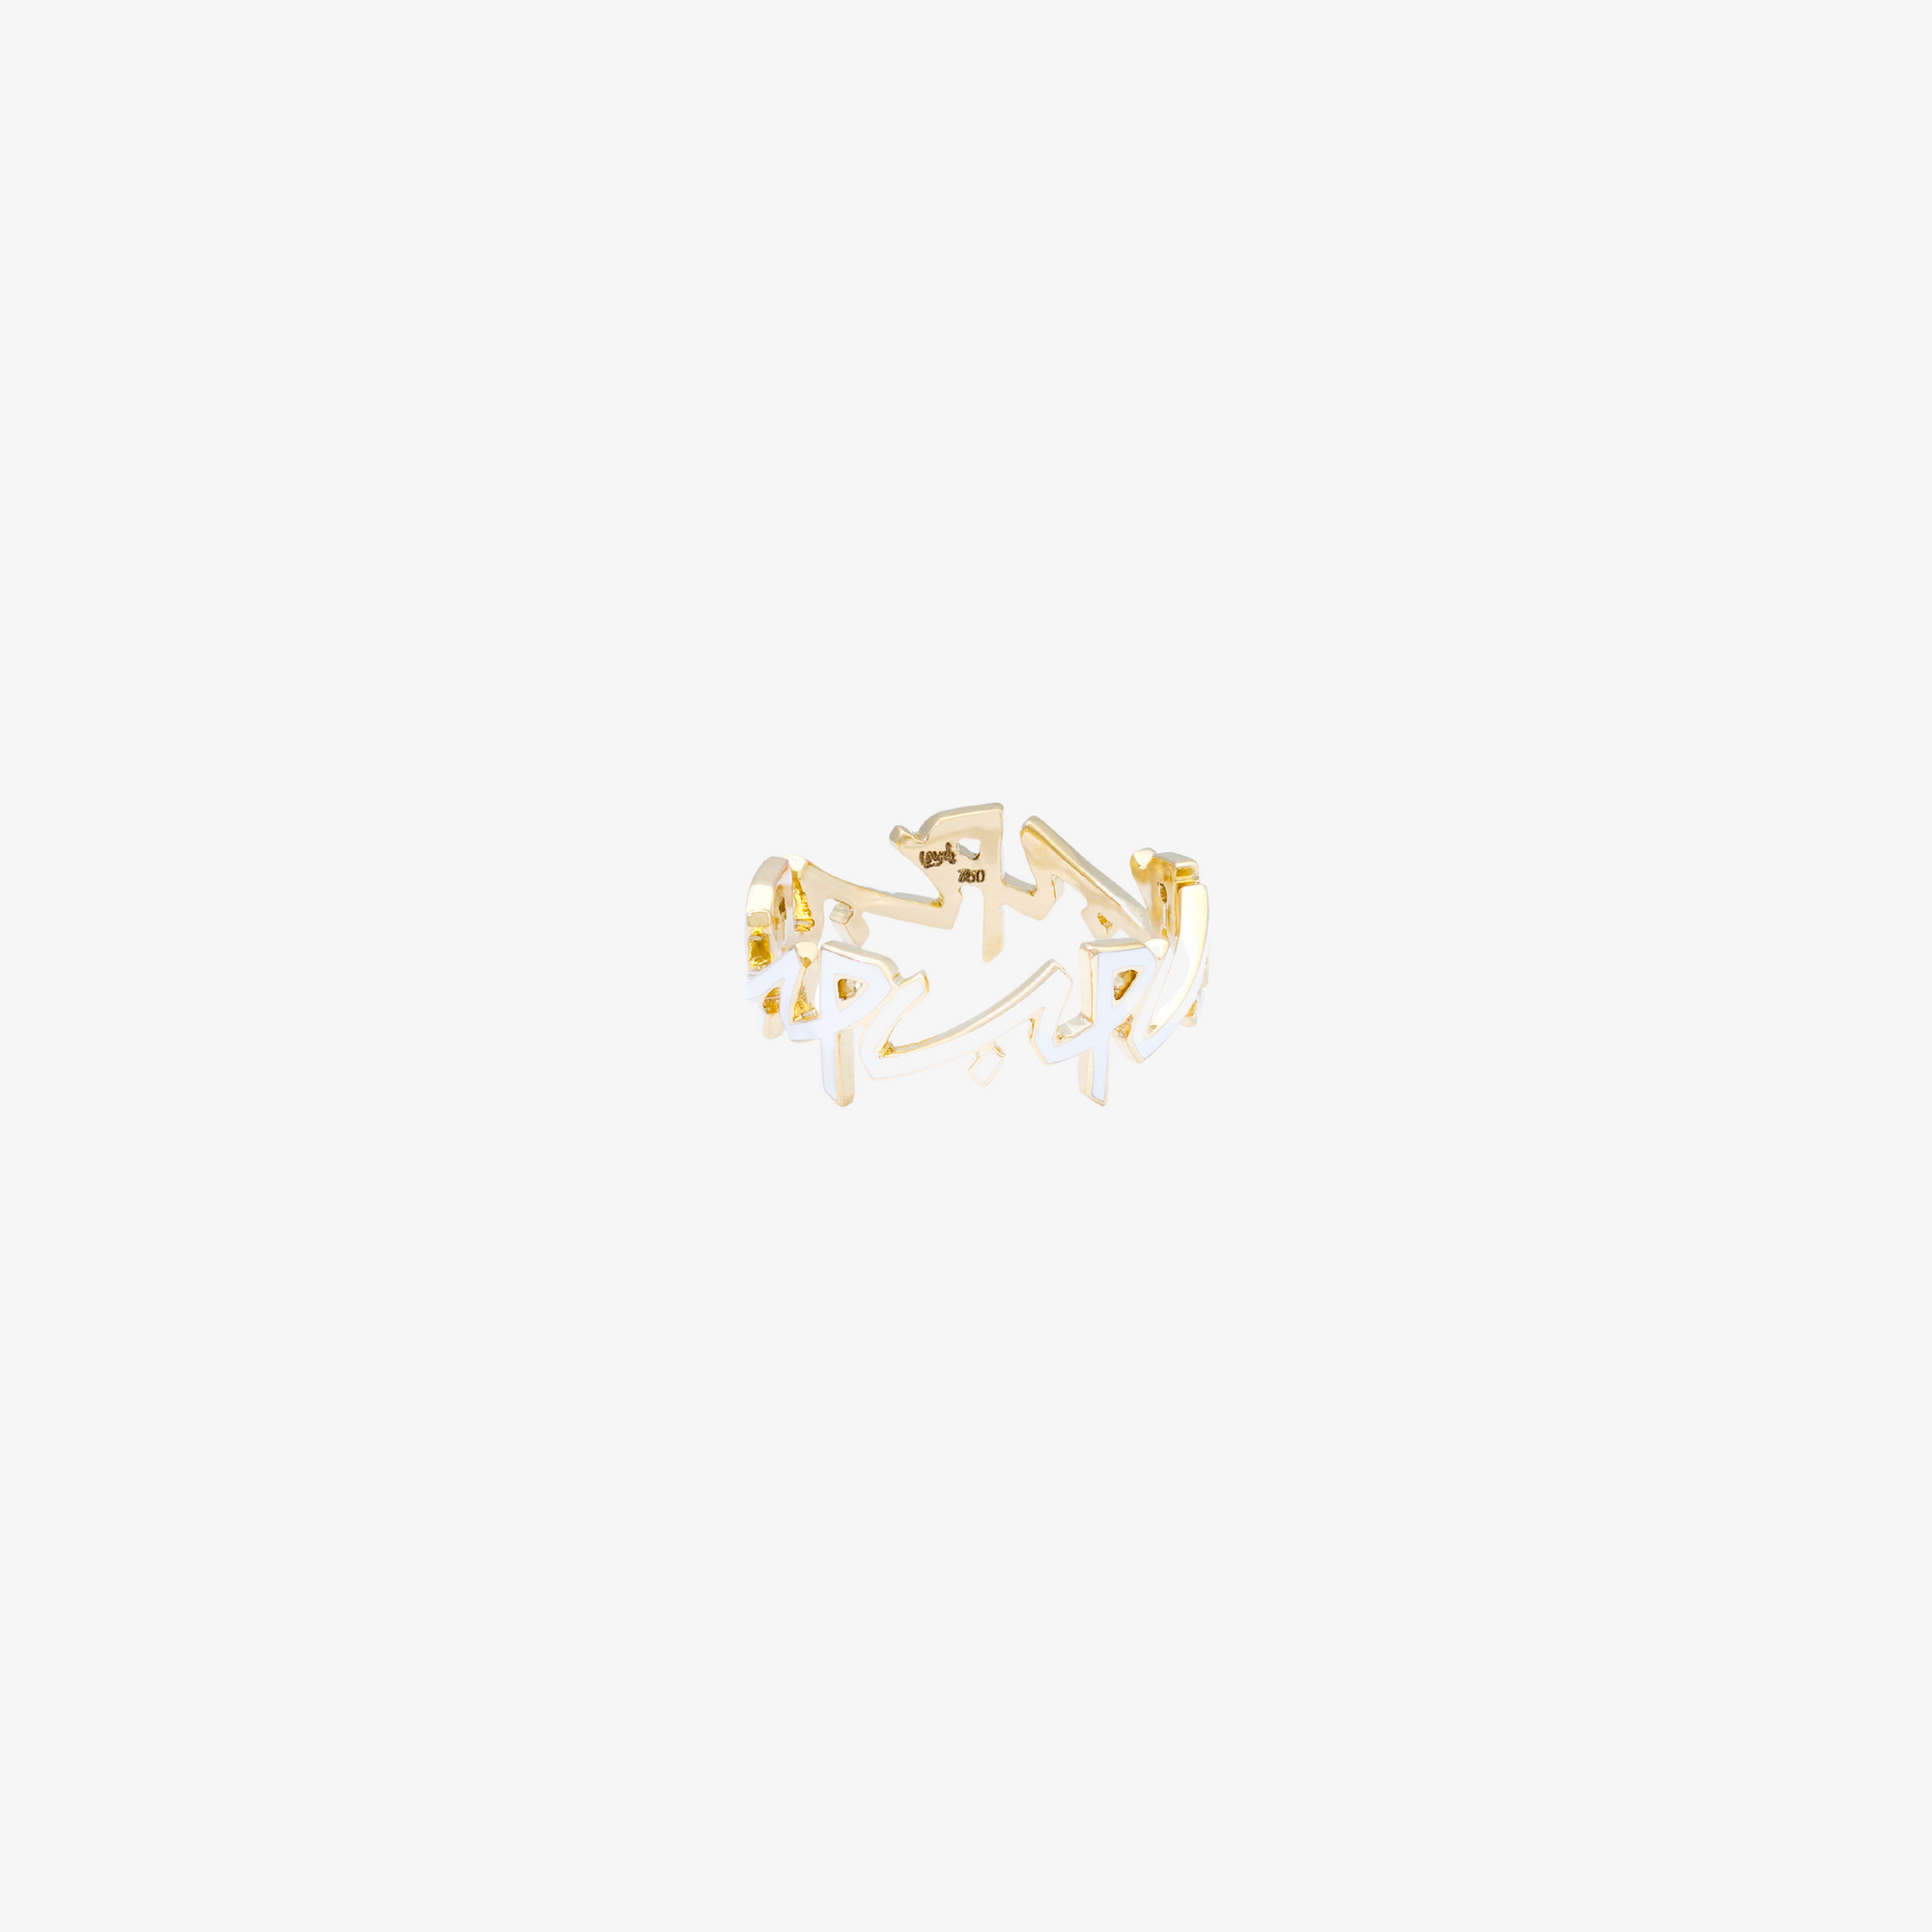 OULA - Gold "Love" Ring